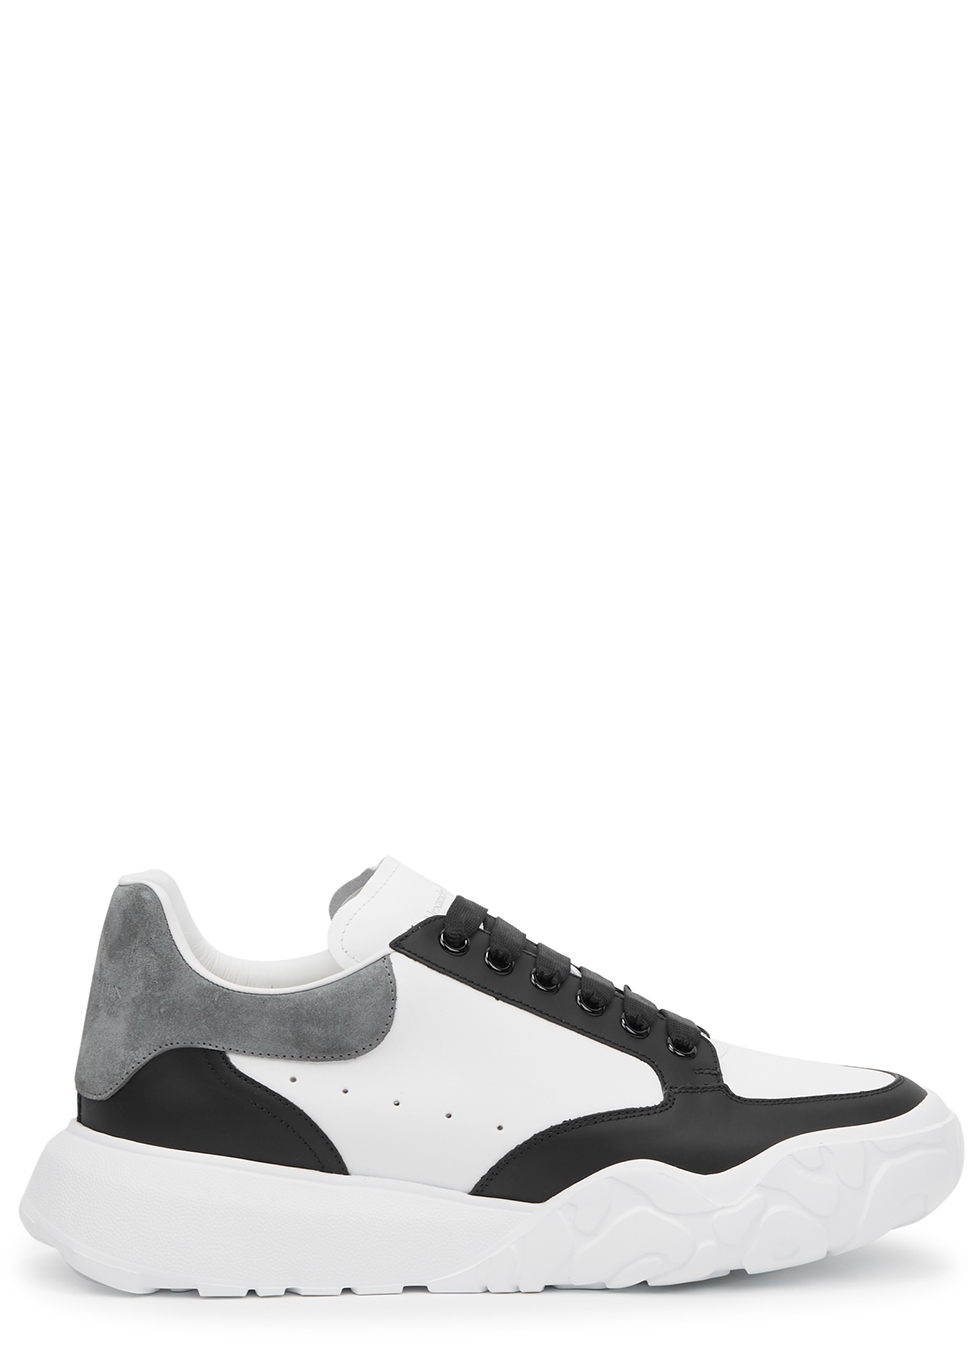 Alexander McQueen Leather Court Sneakers in White Save 4% Womens Shoes Trainers Low-top trainers 